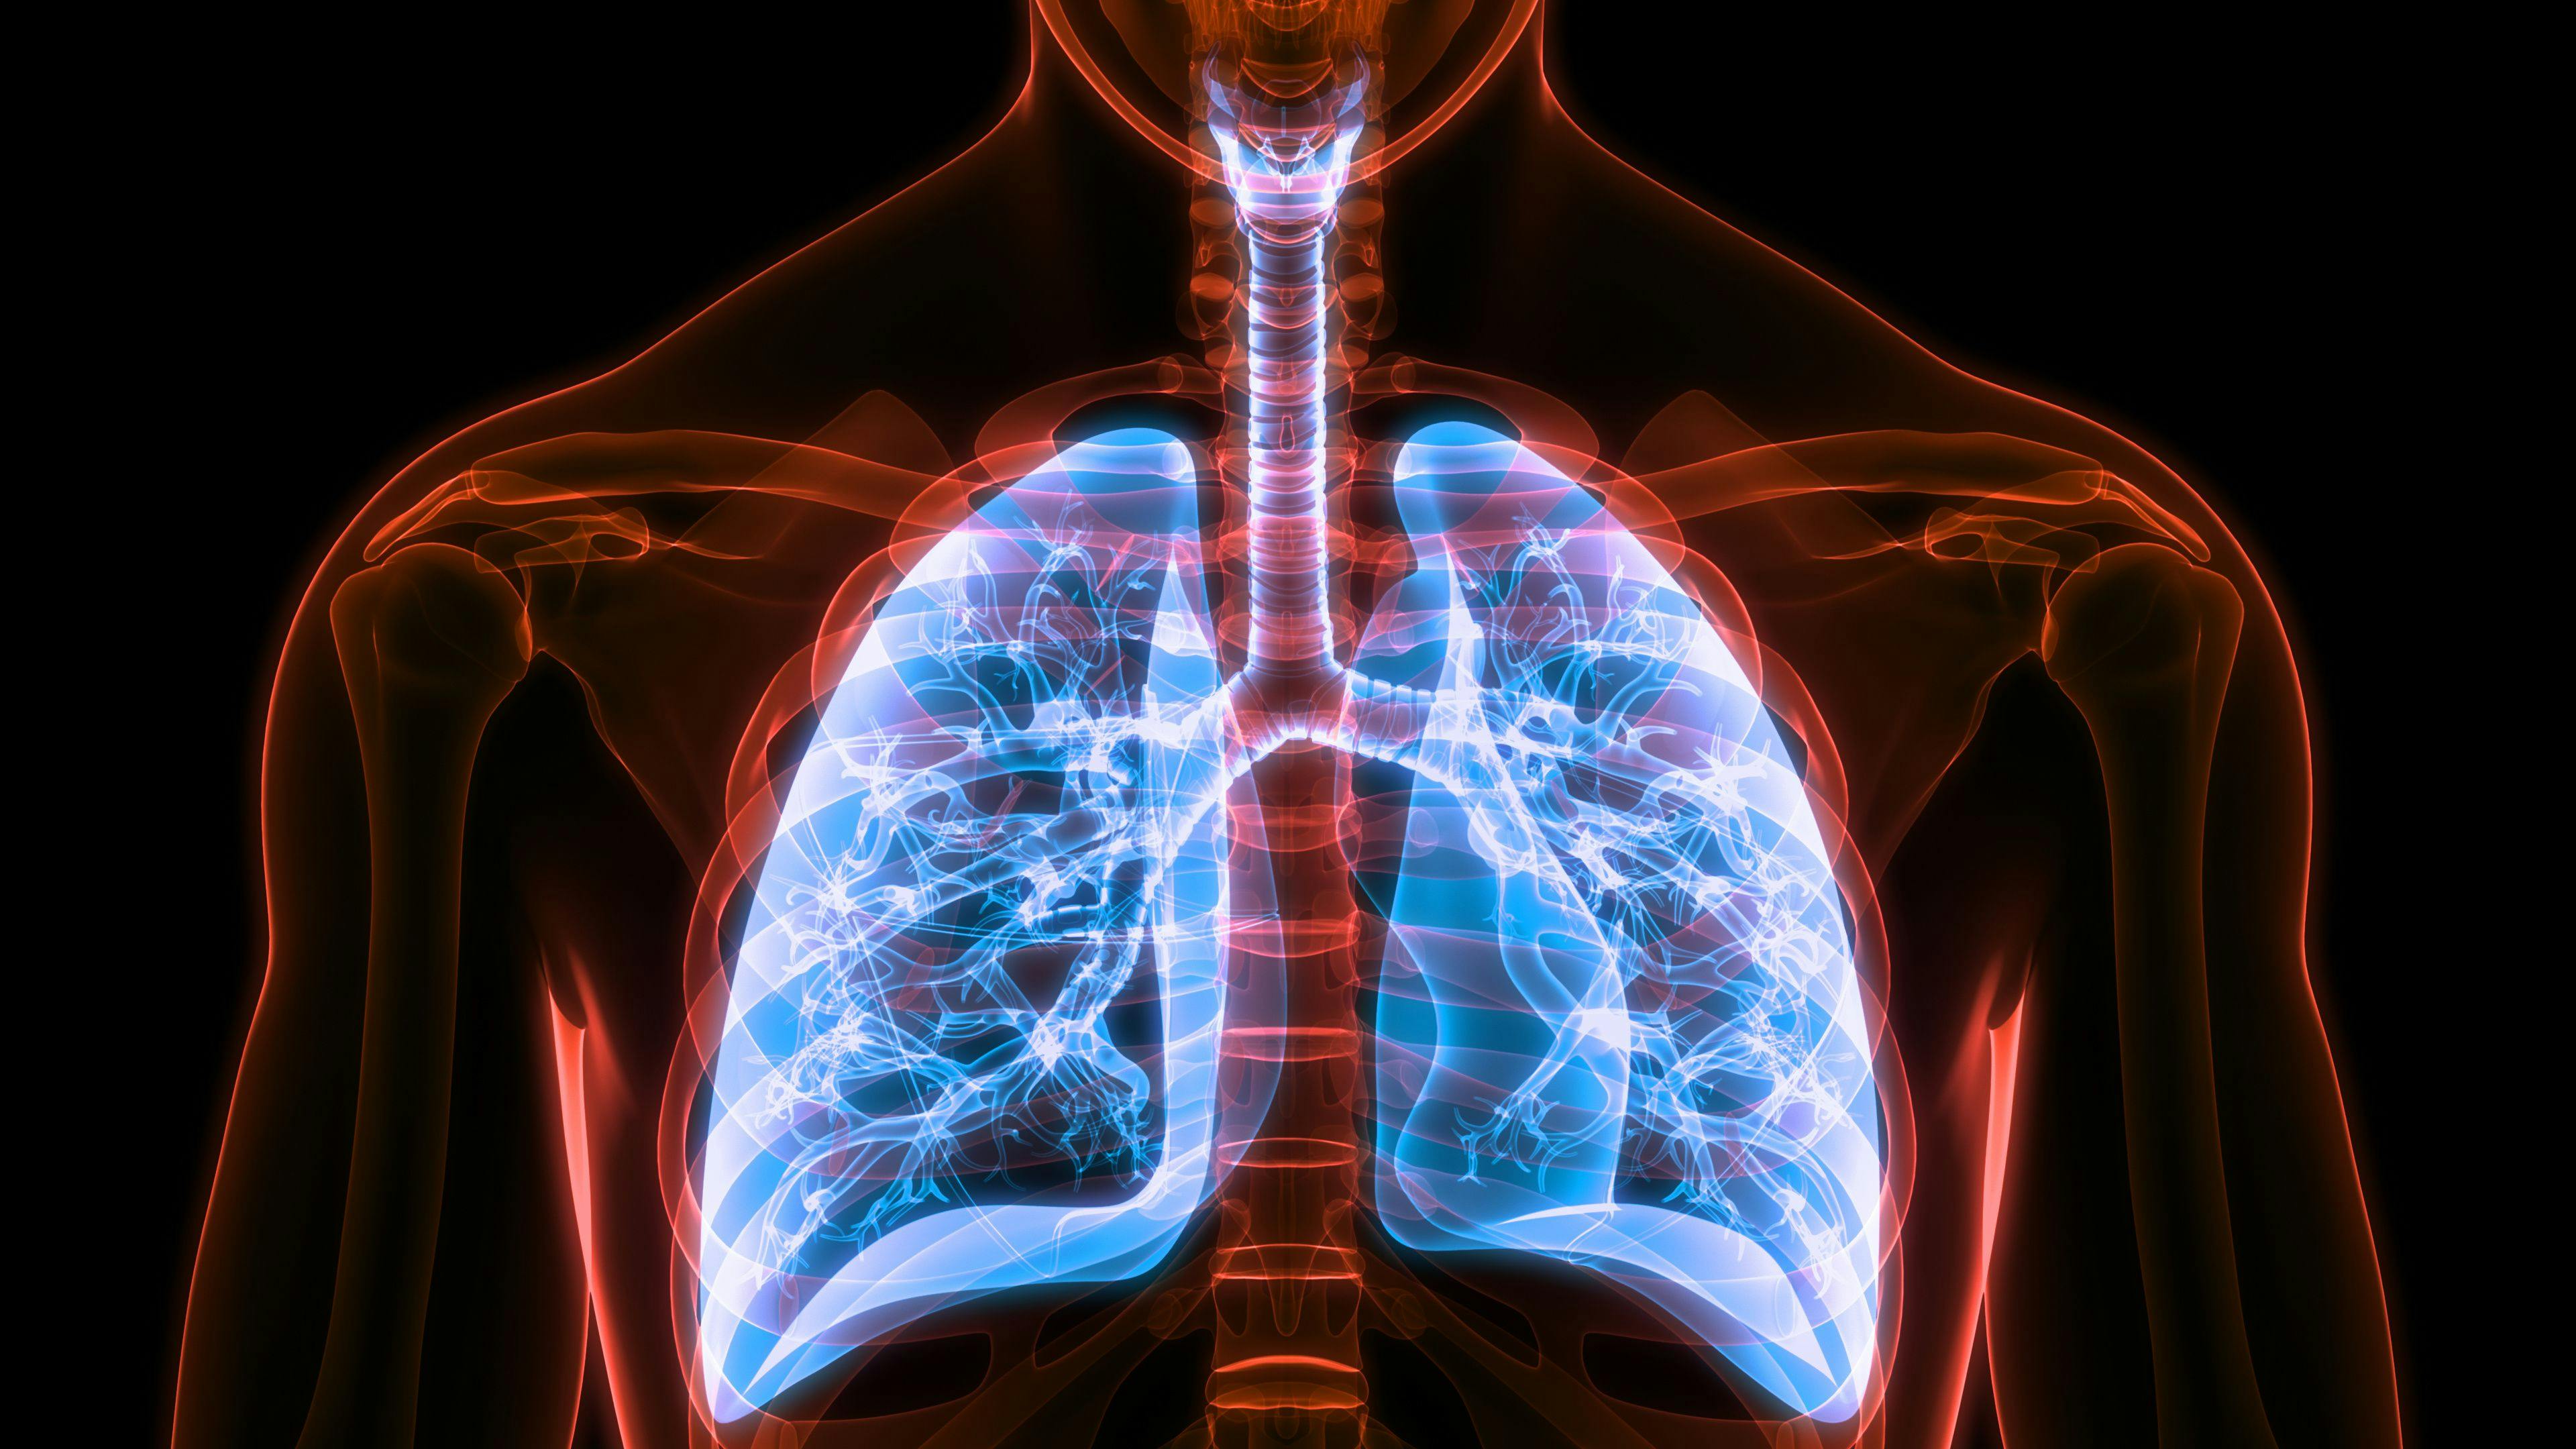 X-ray of lungs -- Image credit: magicmine | stock.adobe.com